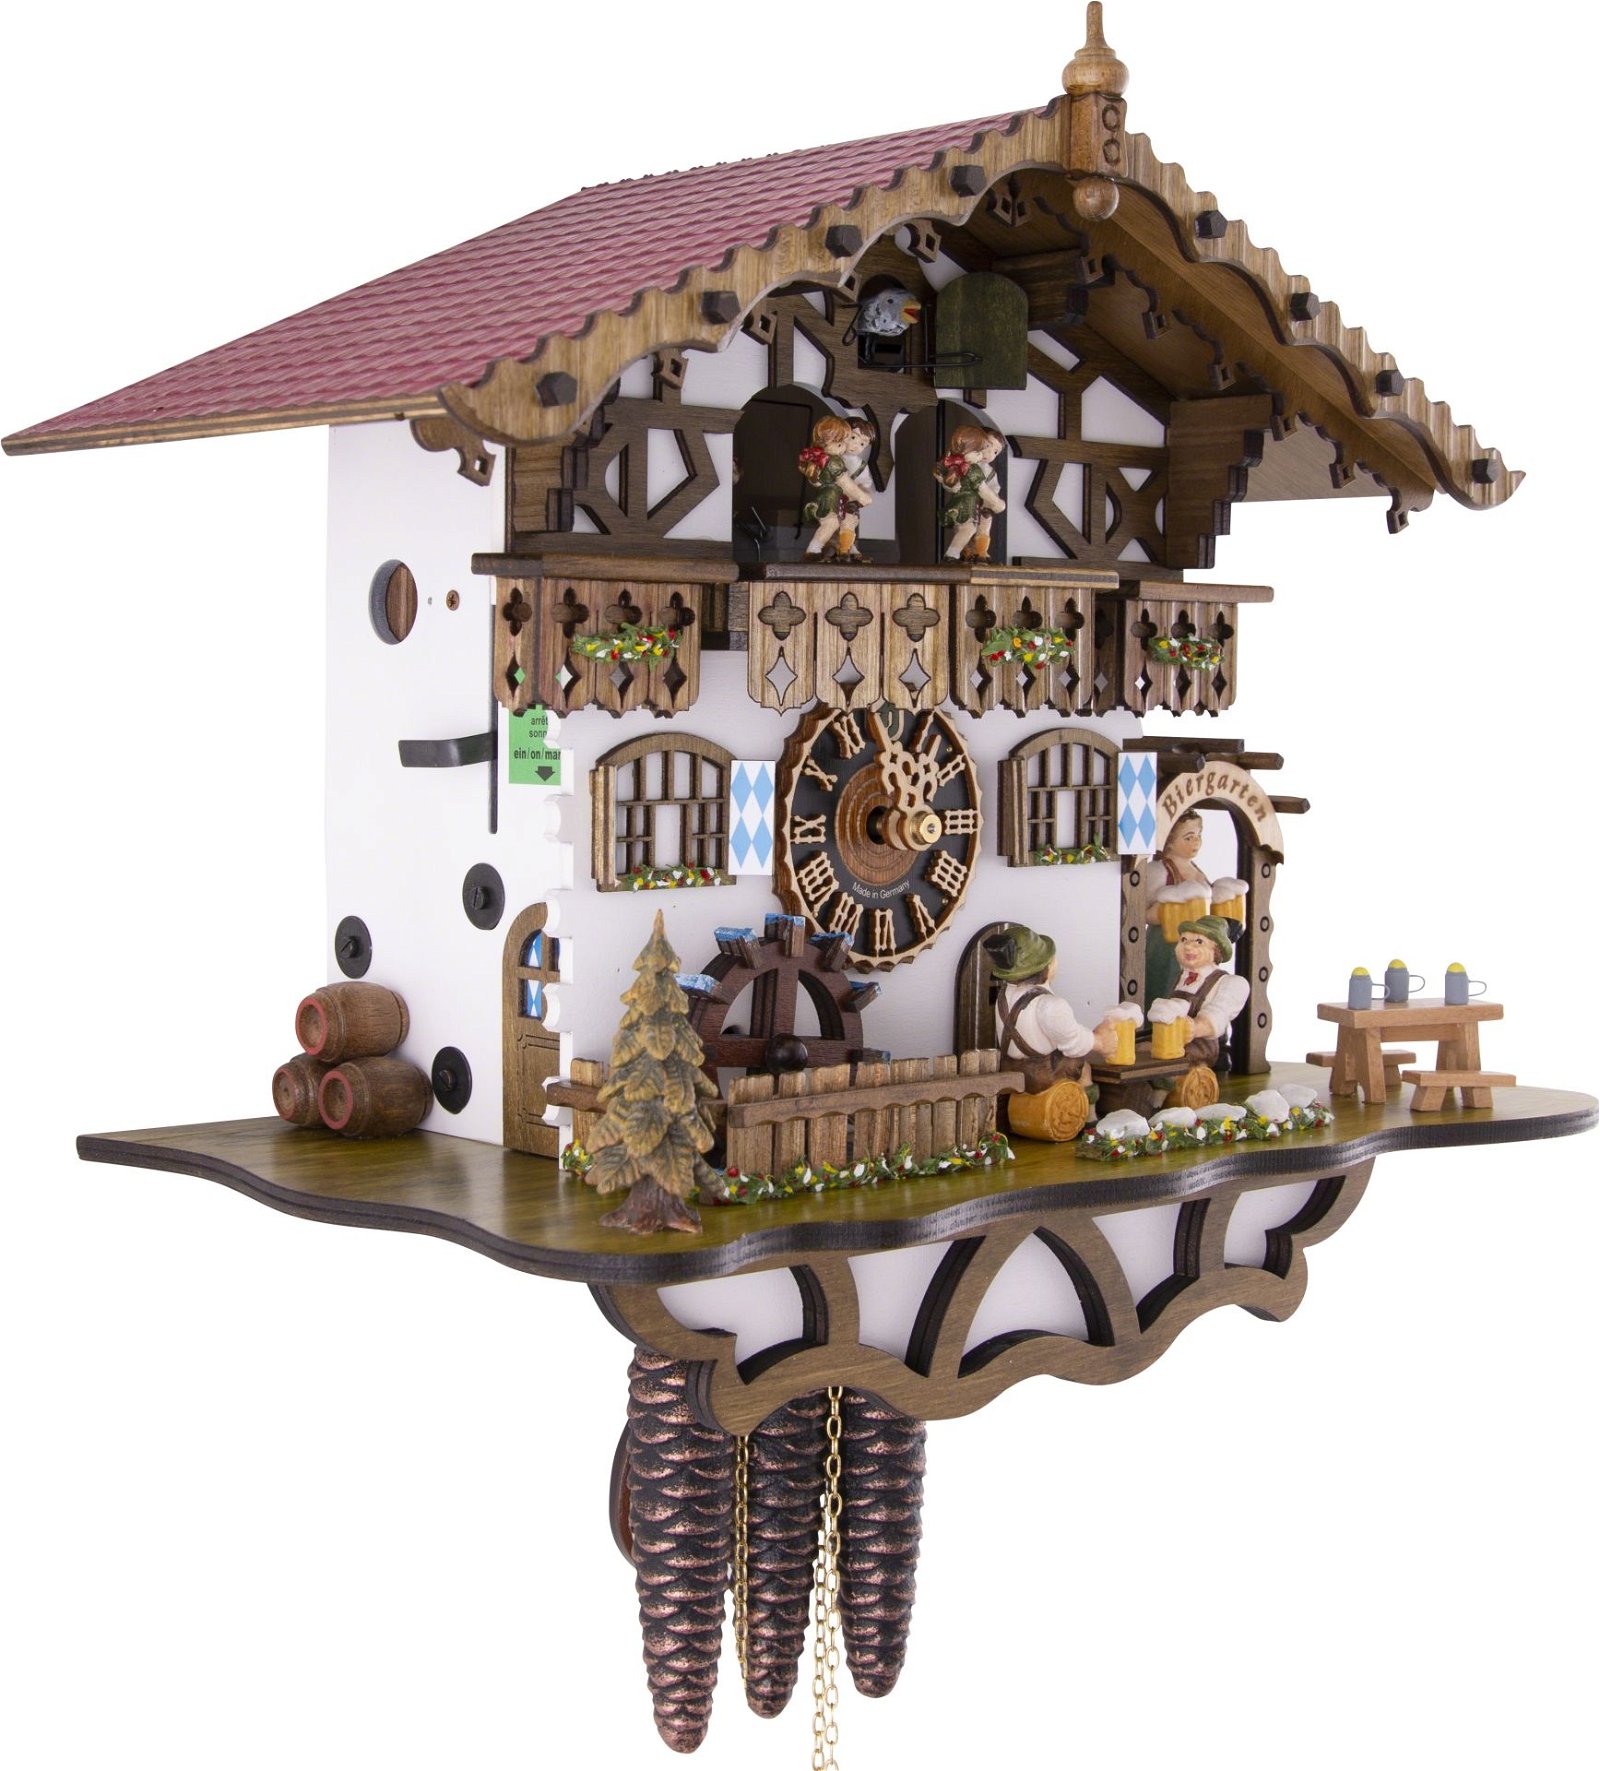 Cuckoo Clock Chalet Style 1 Day Movement 30cm by Hönes